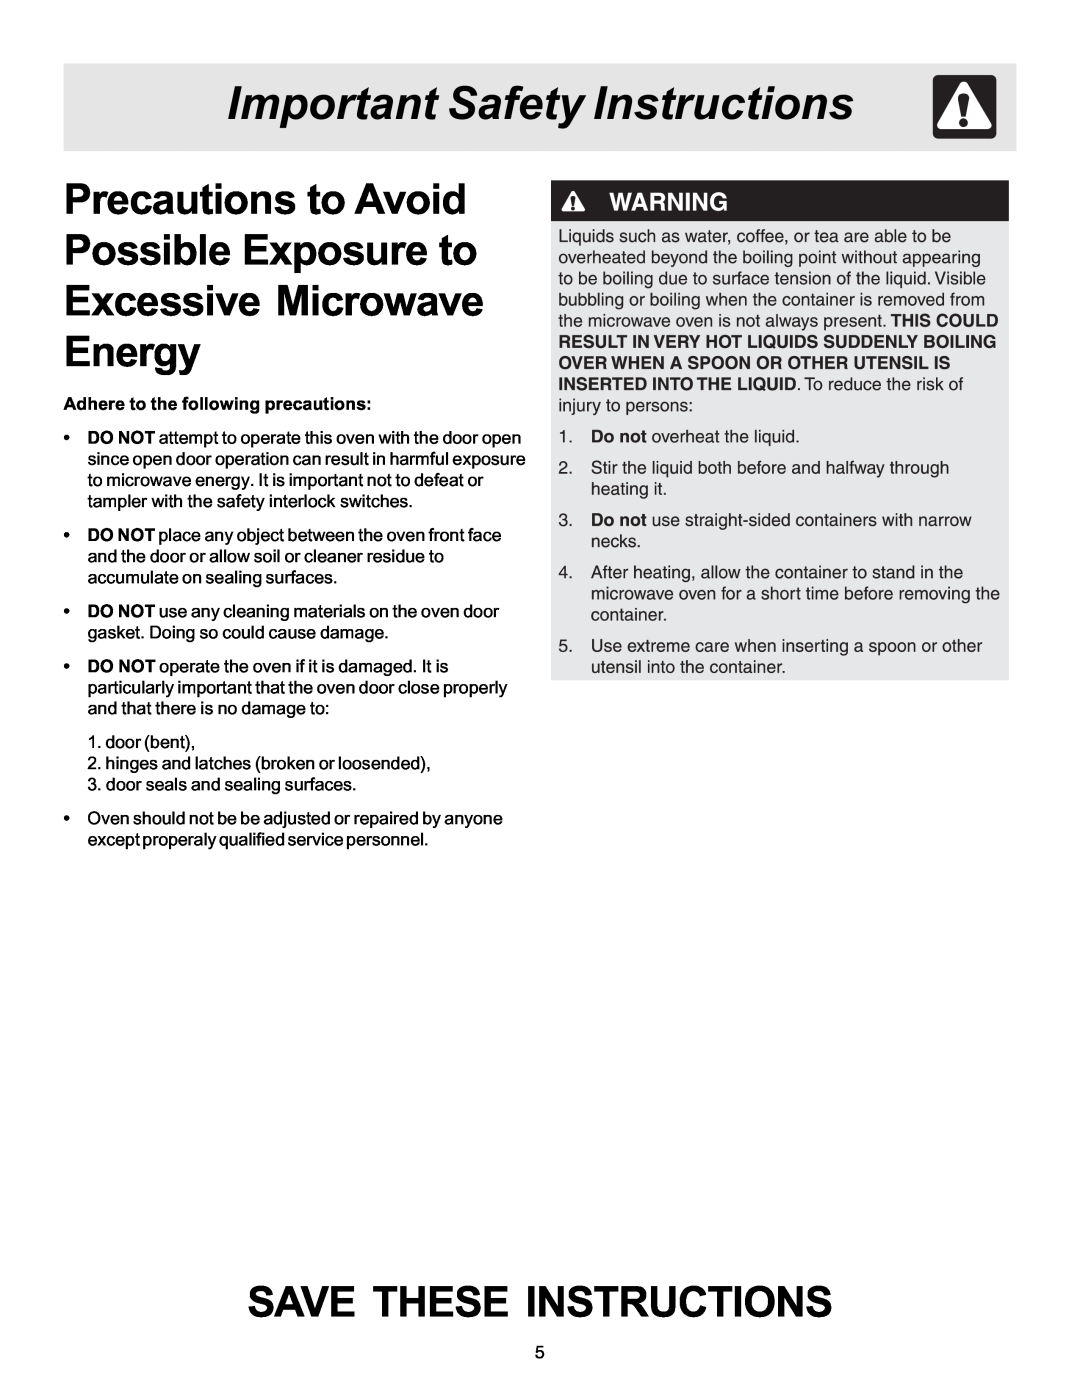 Frigidaire 316495058 Precautions to Avoid Possible Exposure to, Excessive Microwave Energy, Important Safety Instructions 